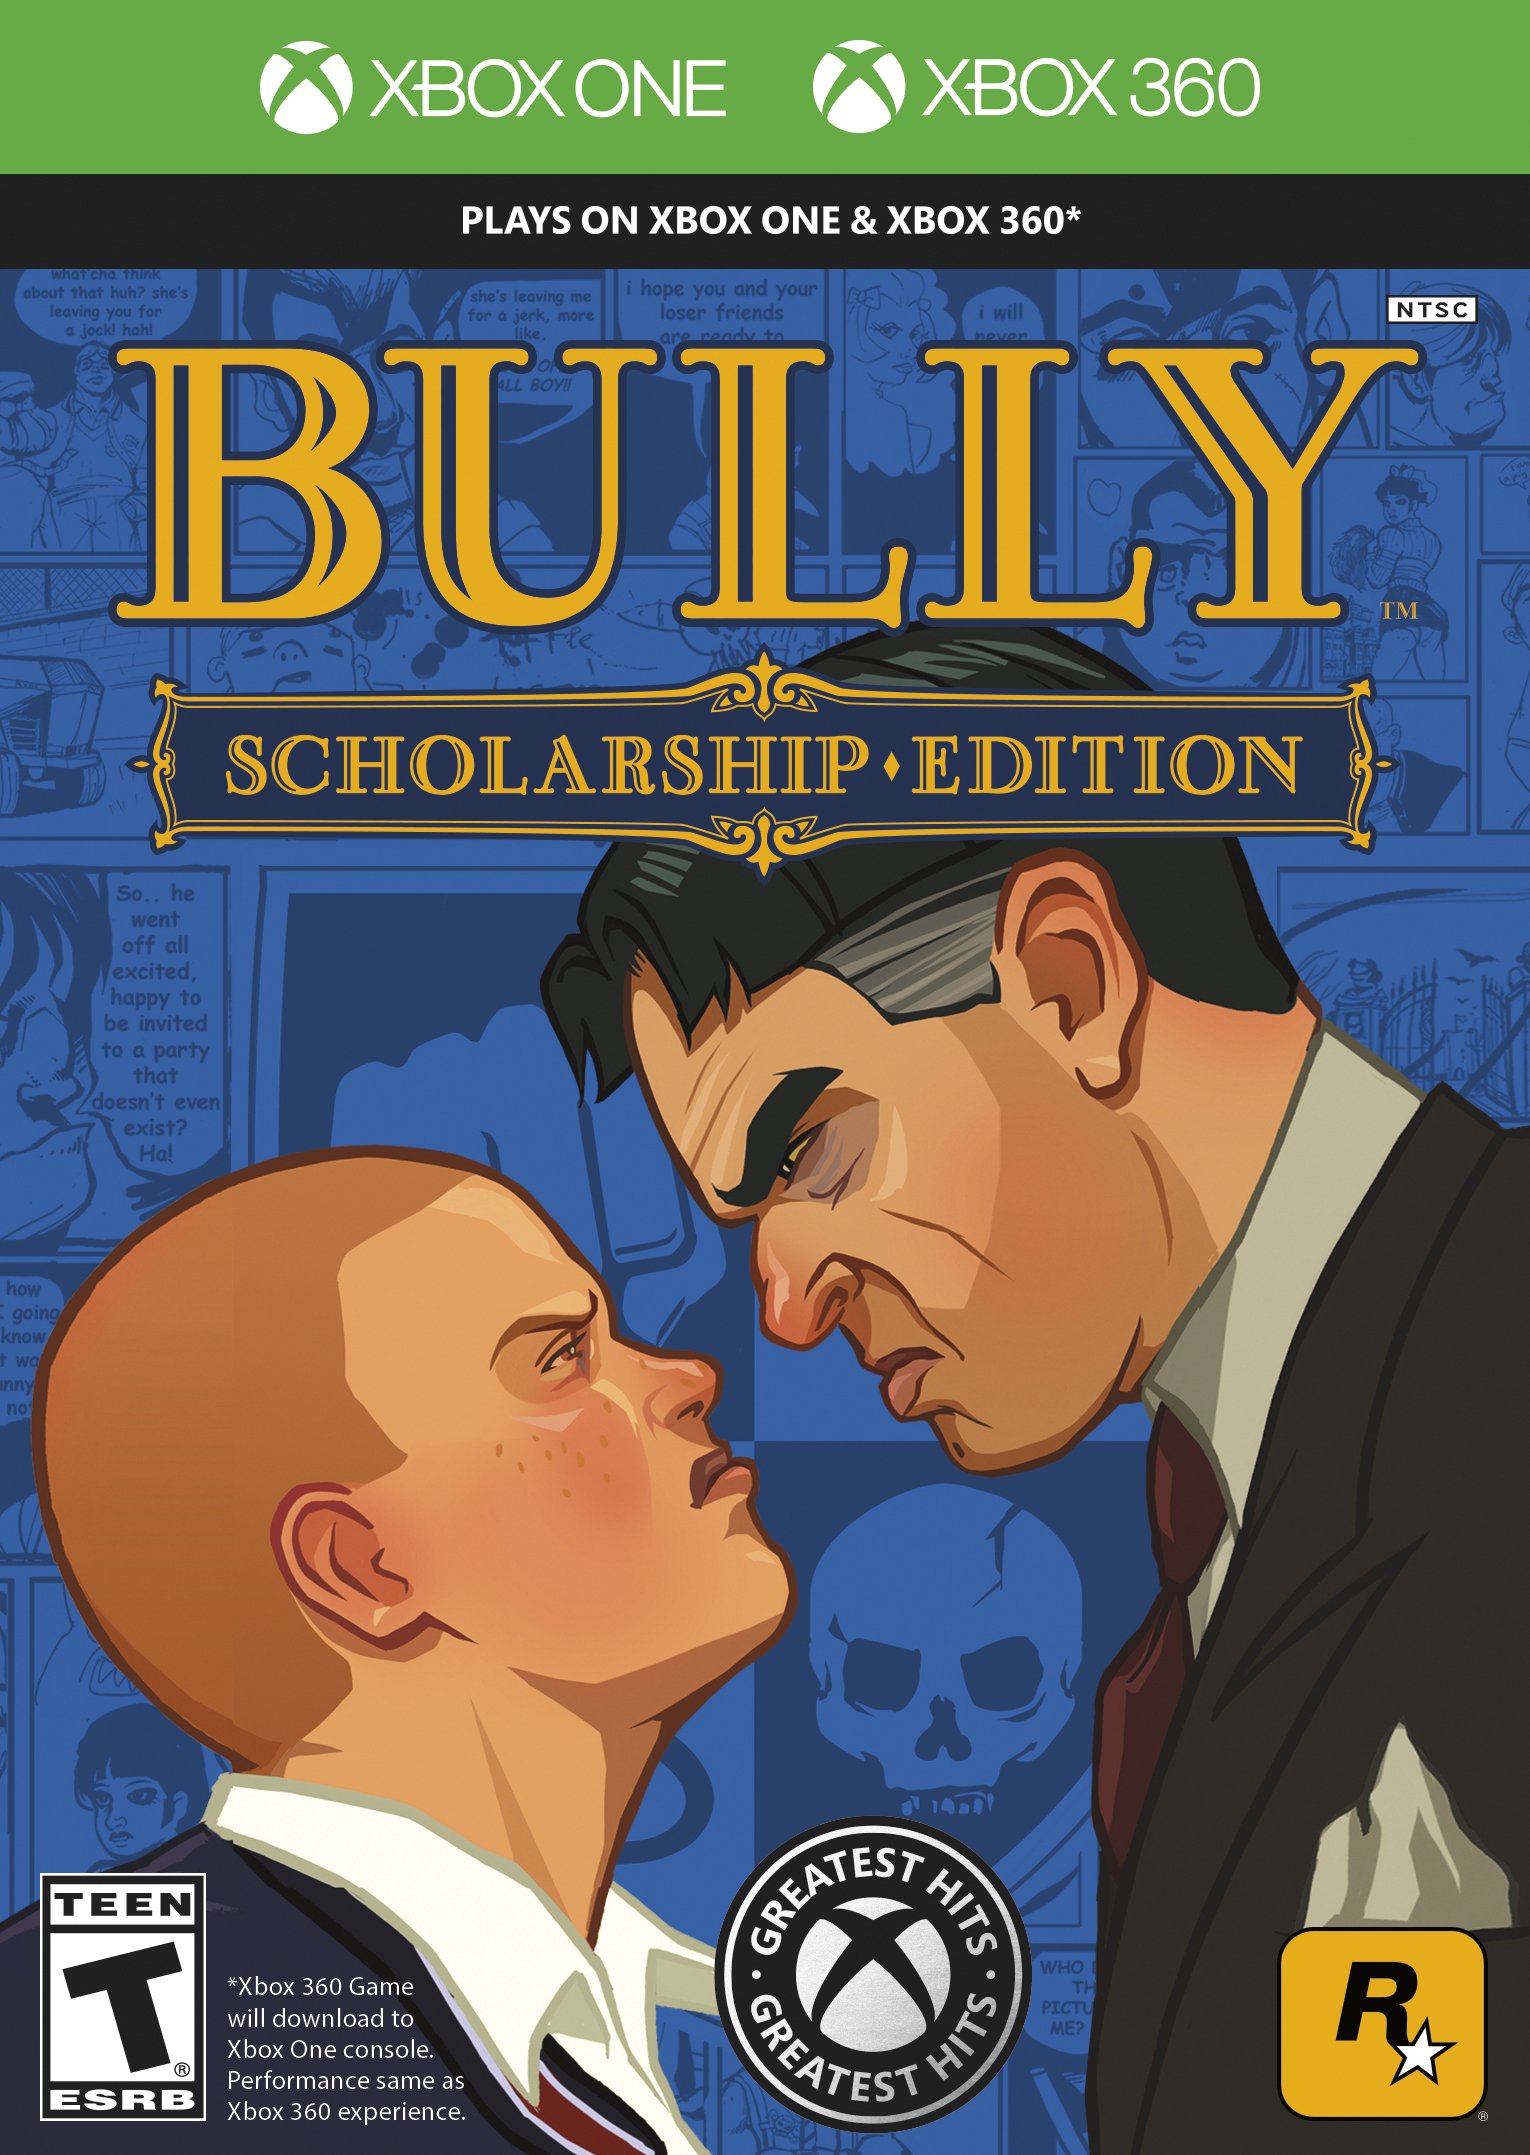 Bully: Scholarship Edition, Rockstar Games, Xbox One/360, 710425498985 - image 1 of 7